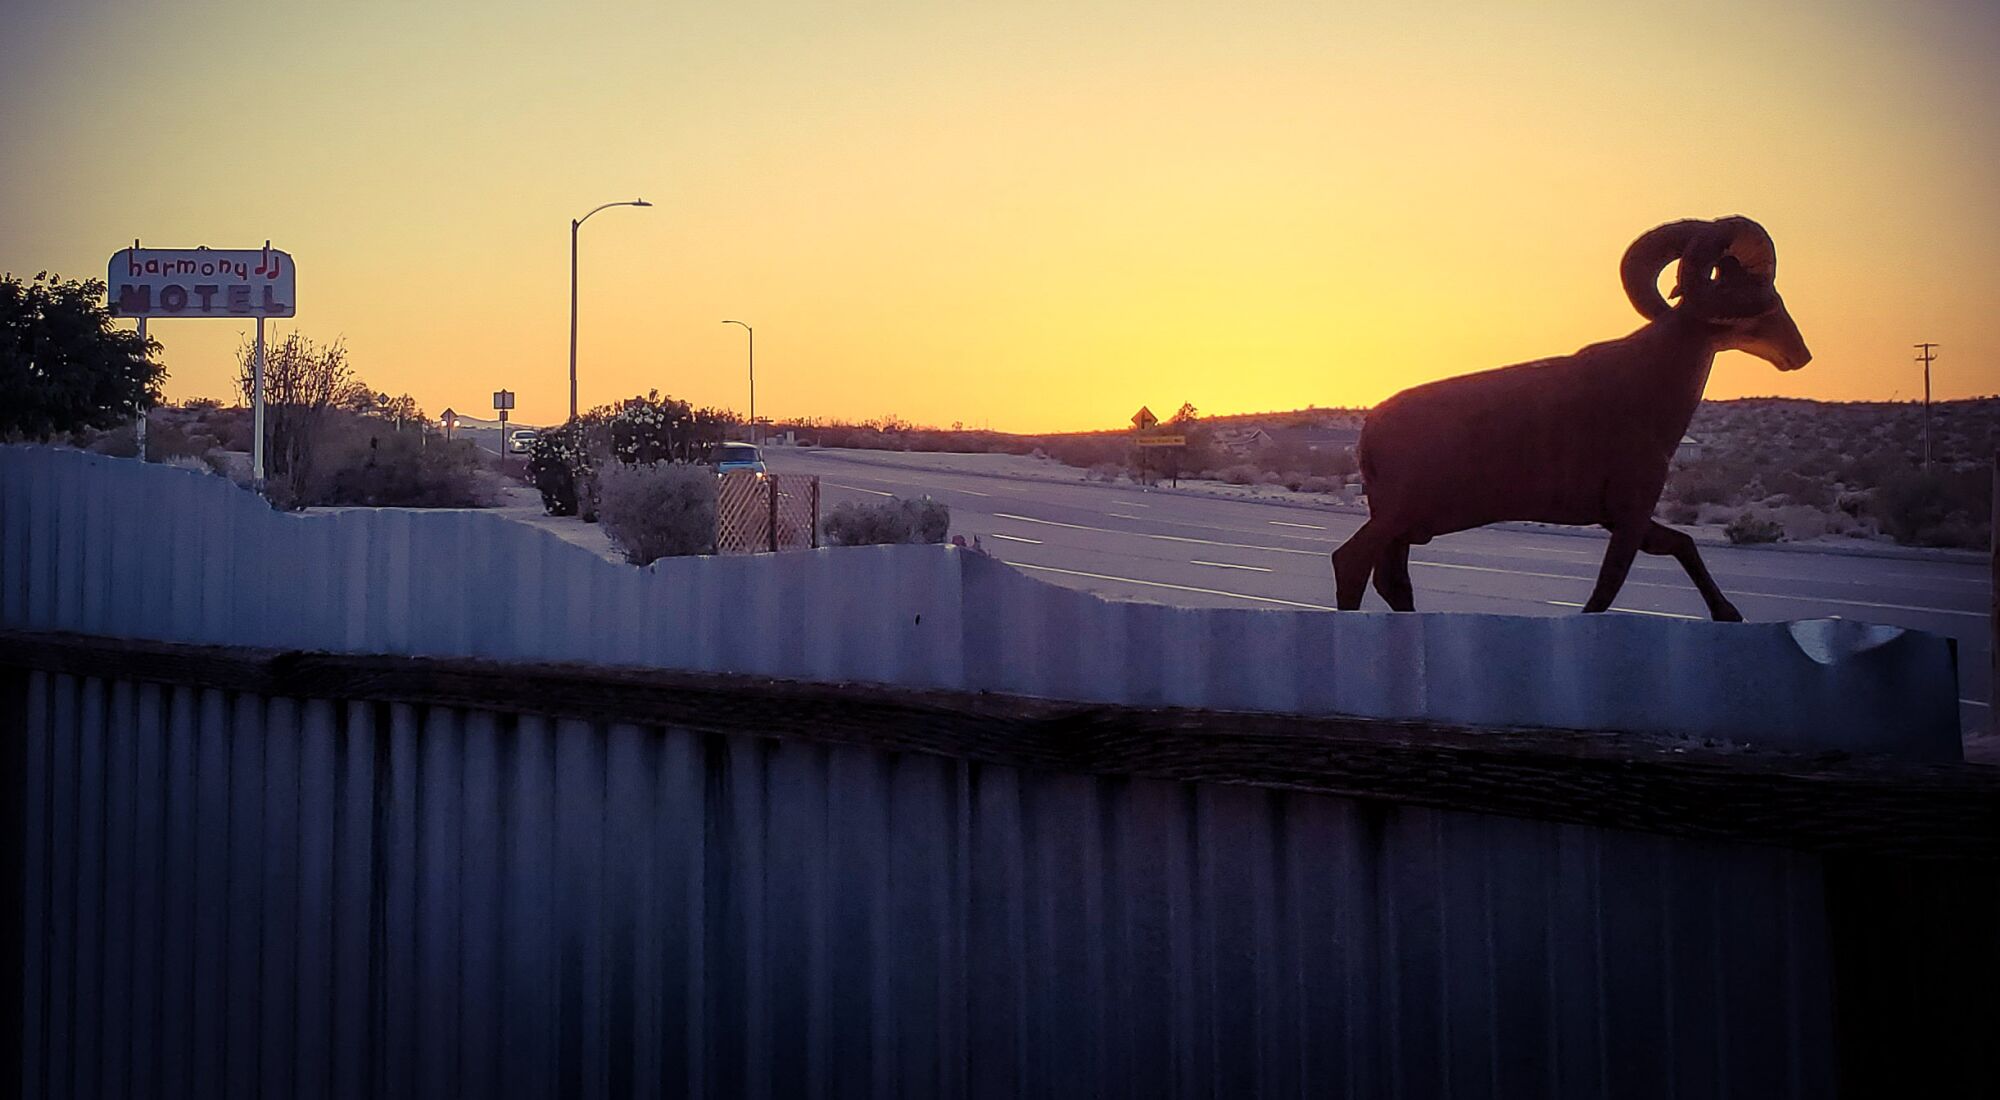 A mountain goat statue appears to be walking along the top of a fence at sunset